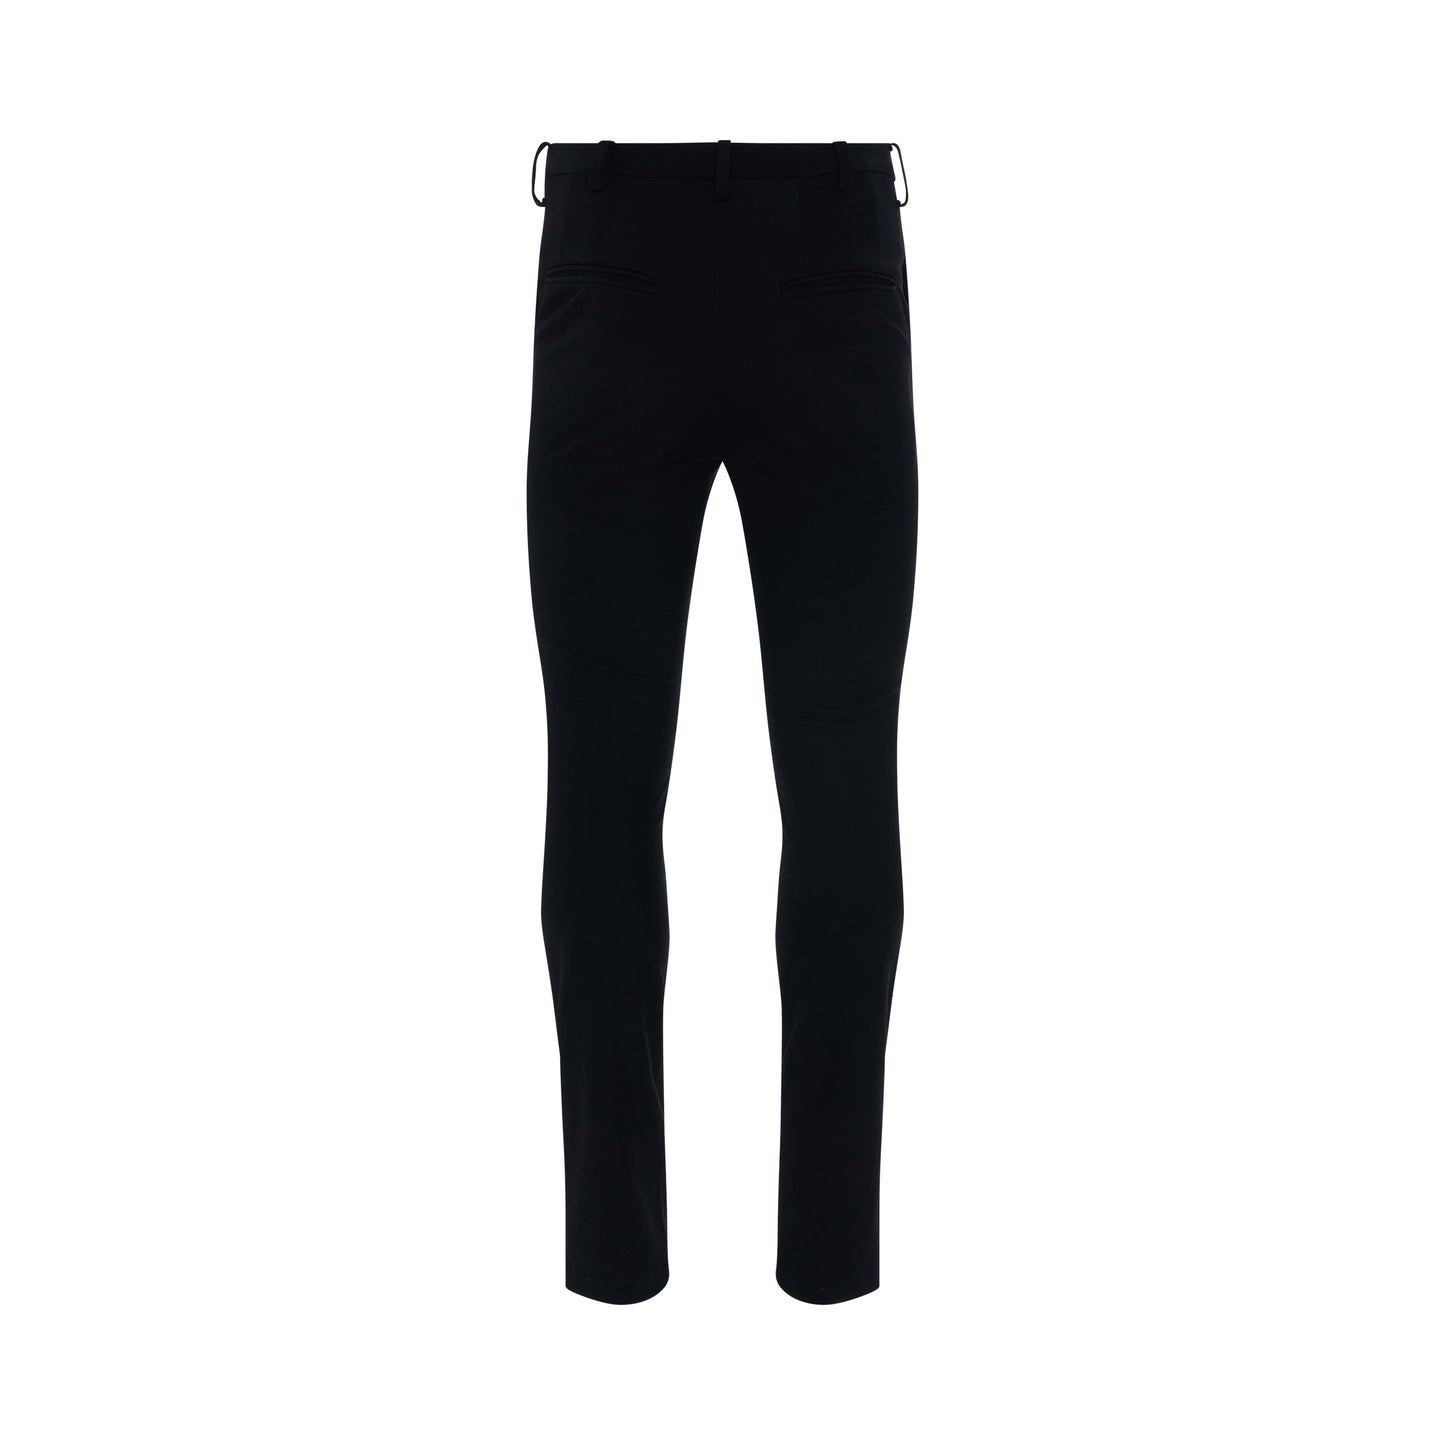 Stretching Tape Trousers in Black